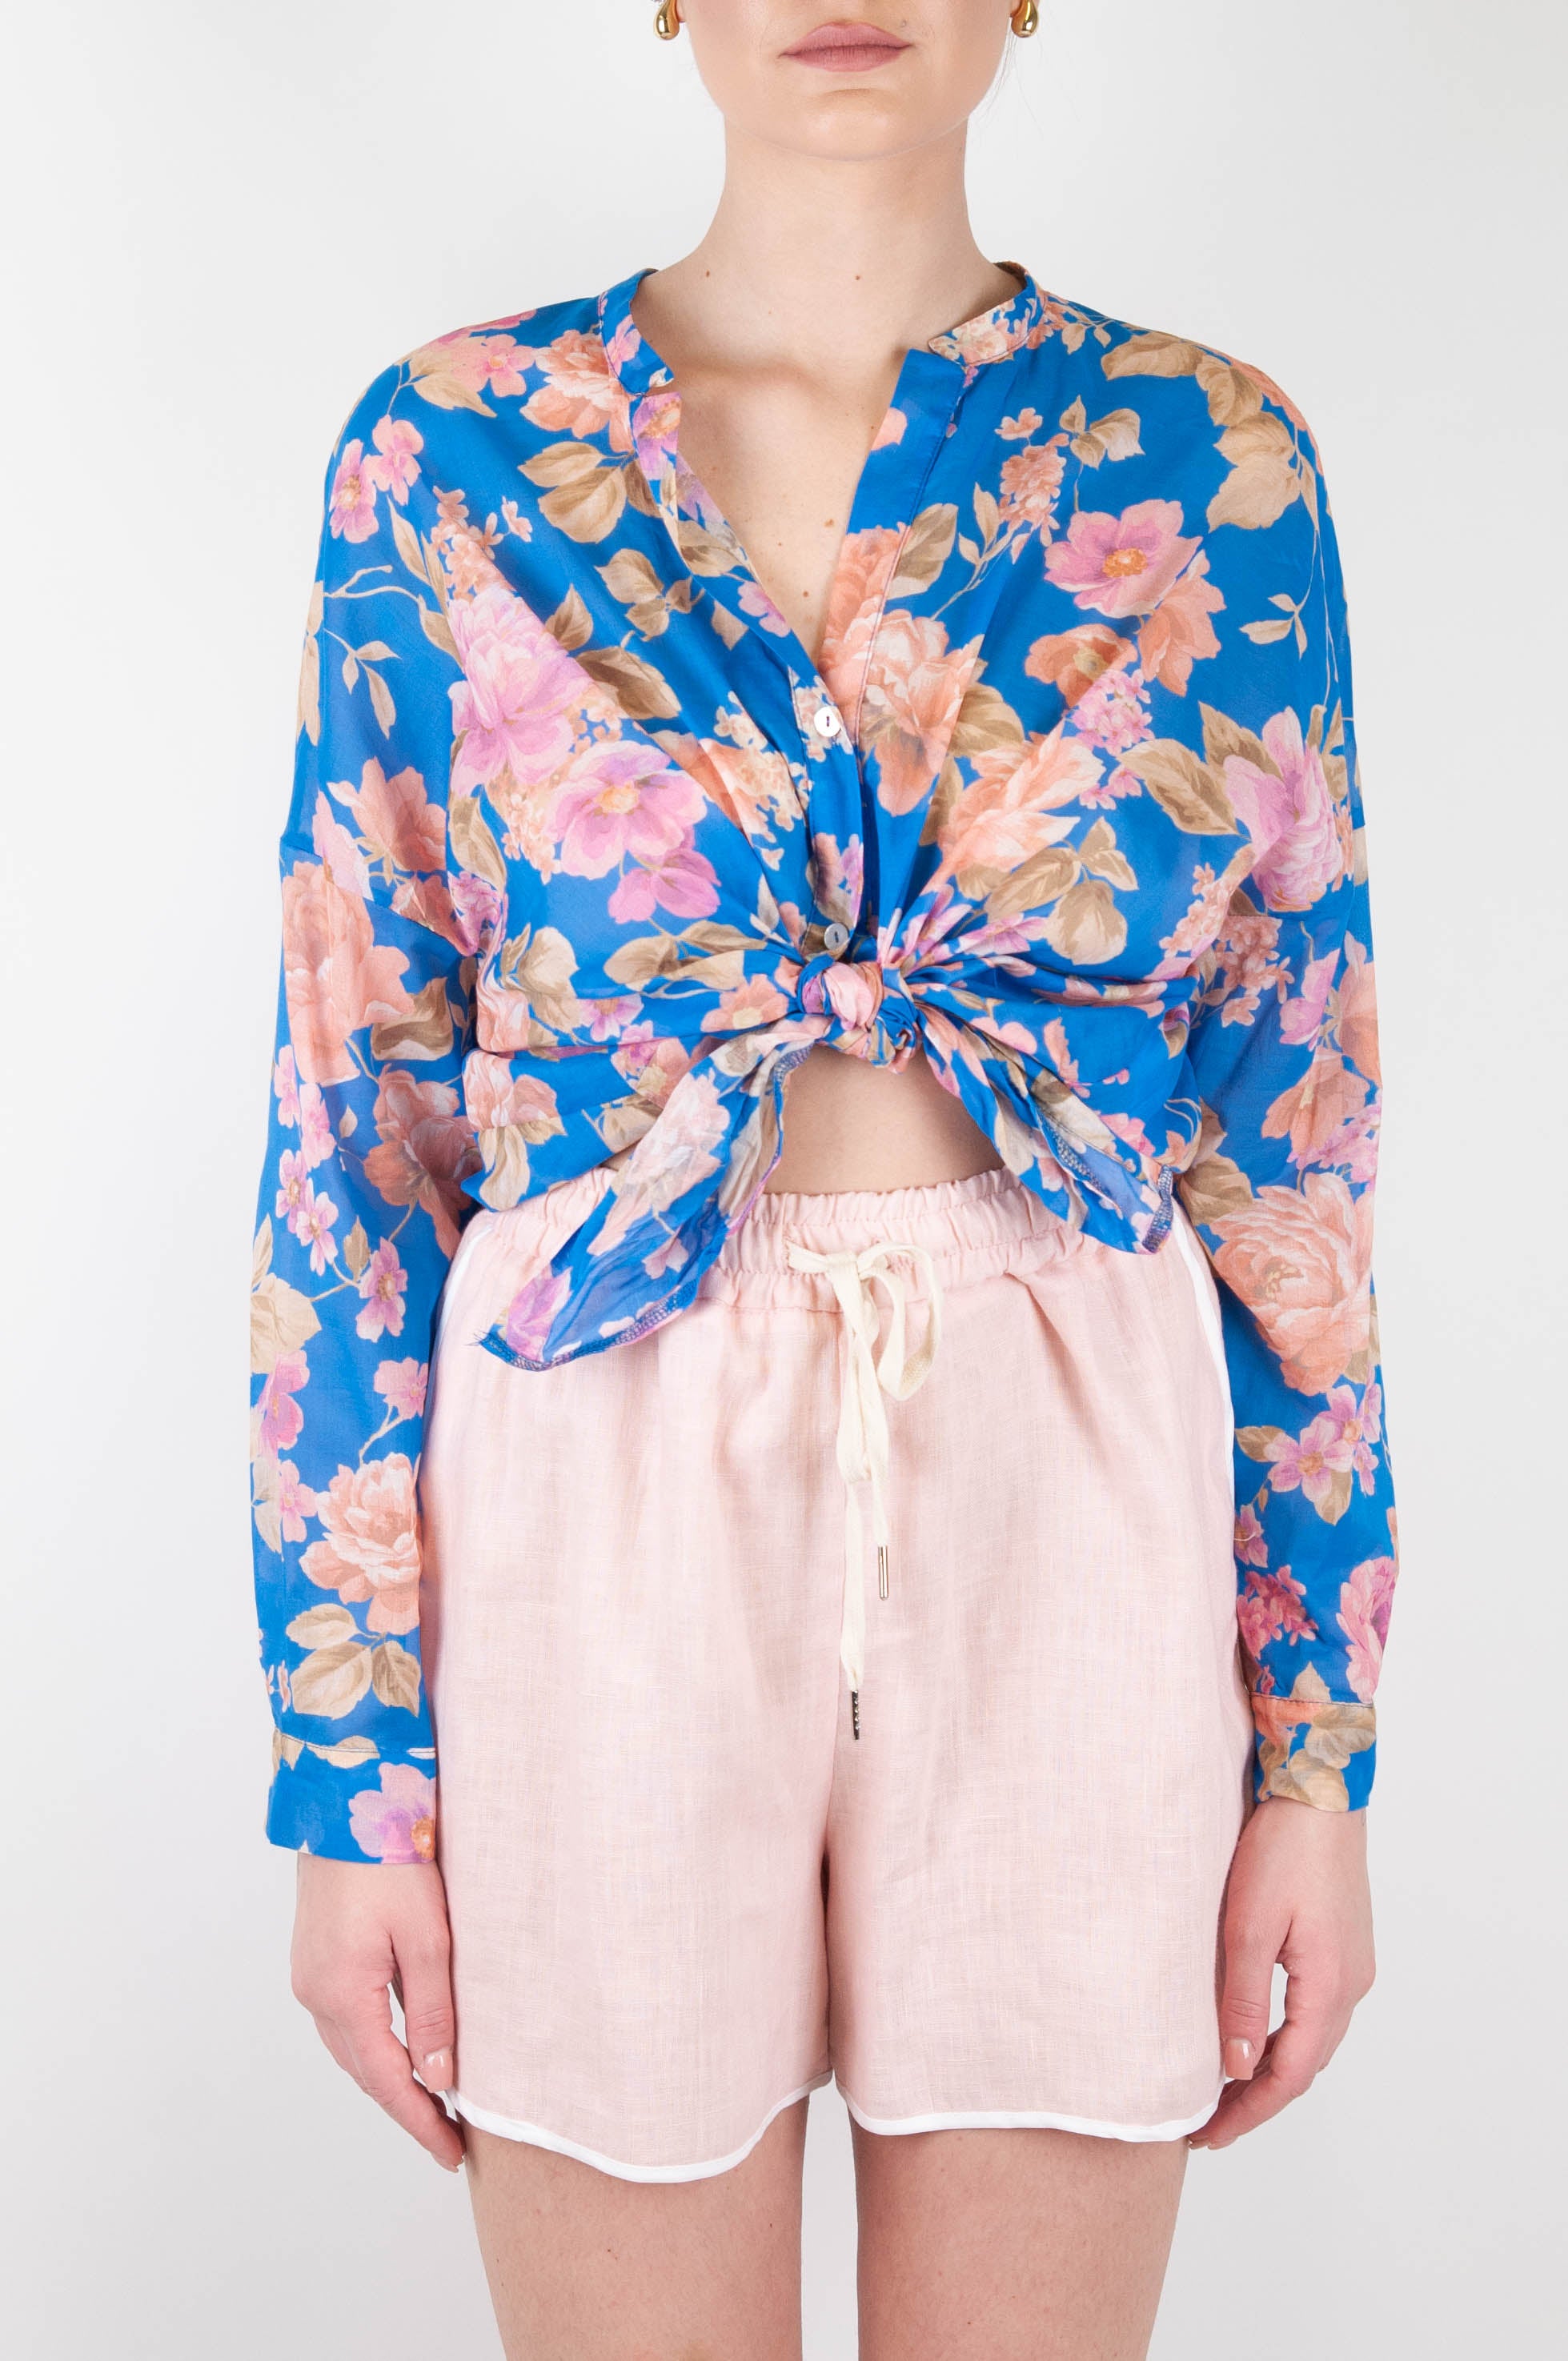 Tension in - Floral patterned shirt in cotton muslin